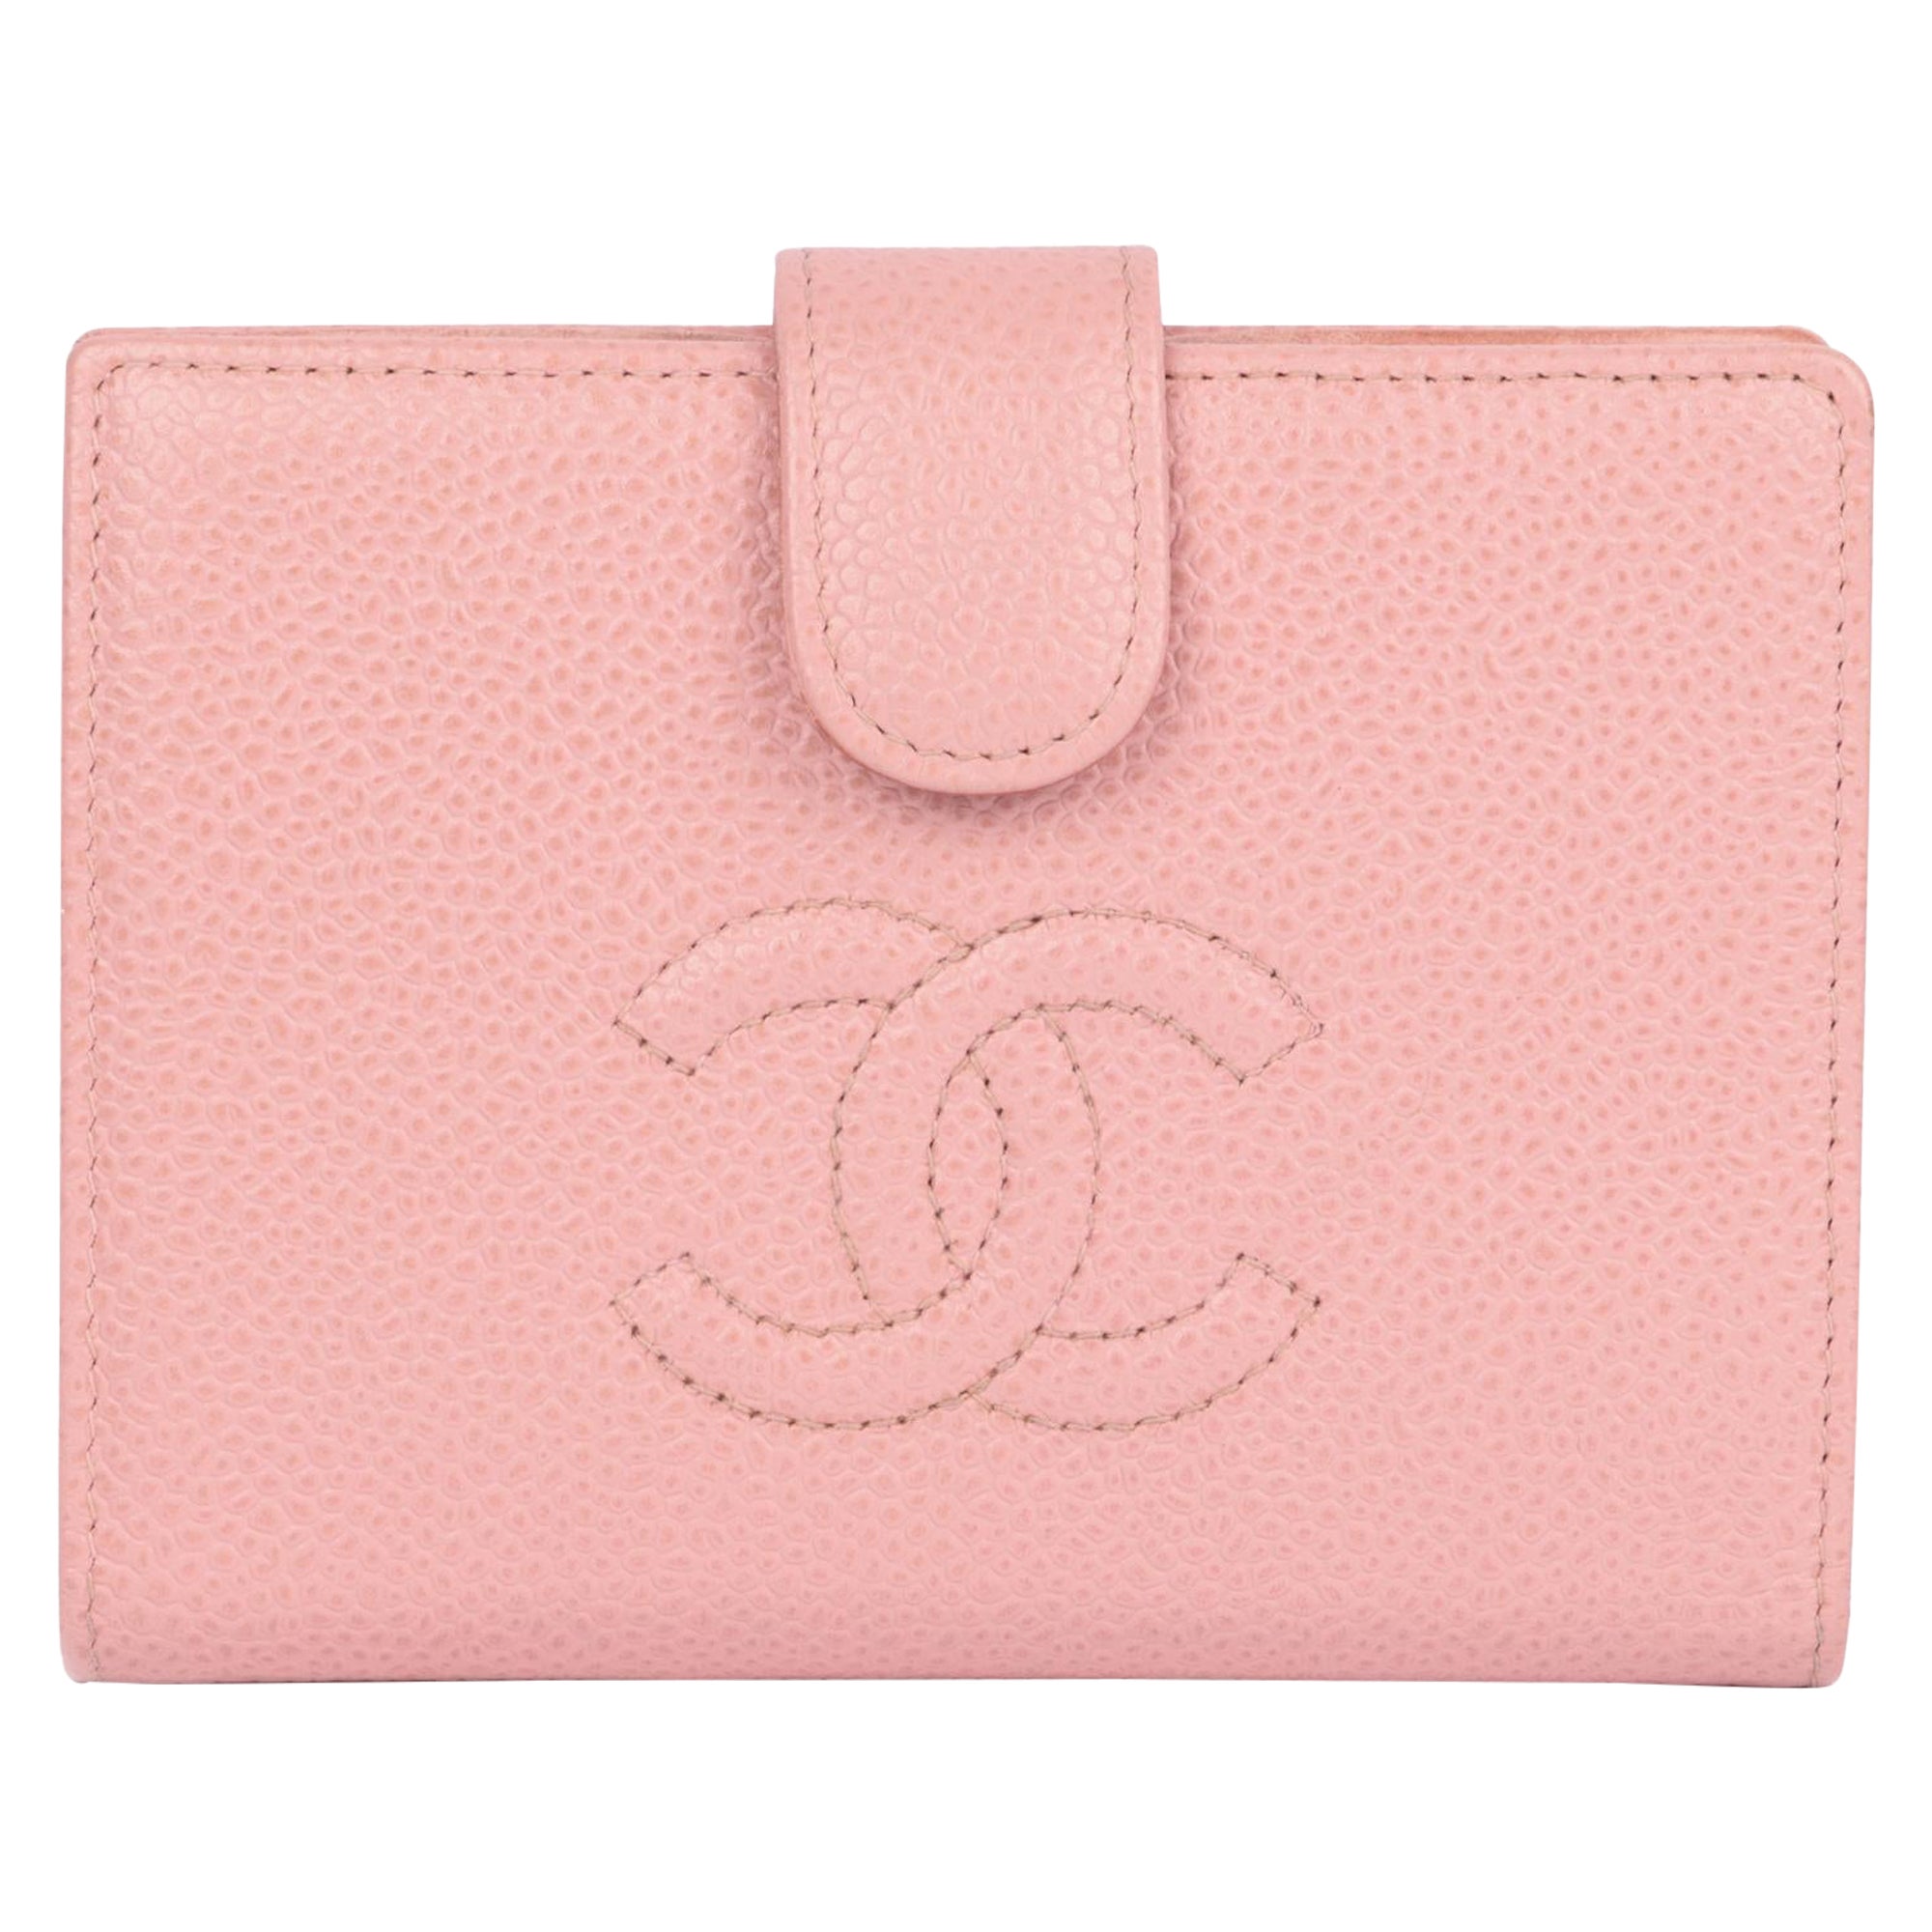 Chanel Pink Caviar Lambskin Leather Timeless Compact Wallet